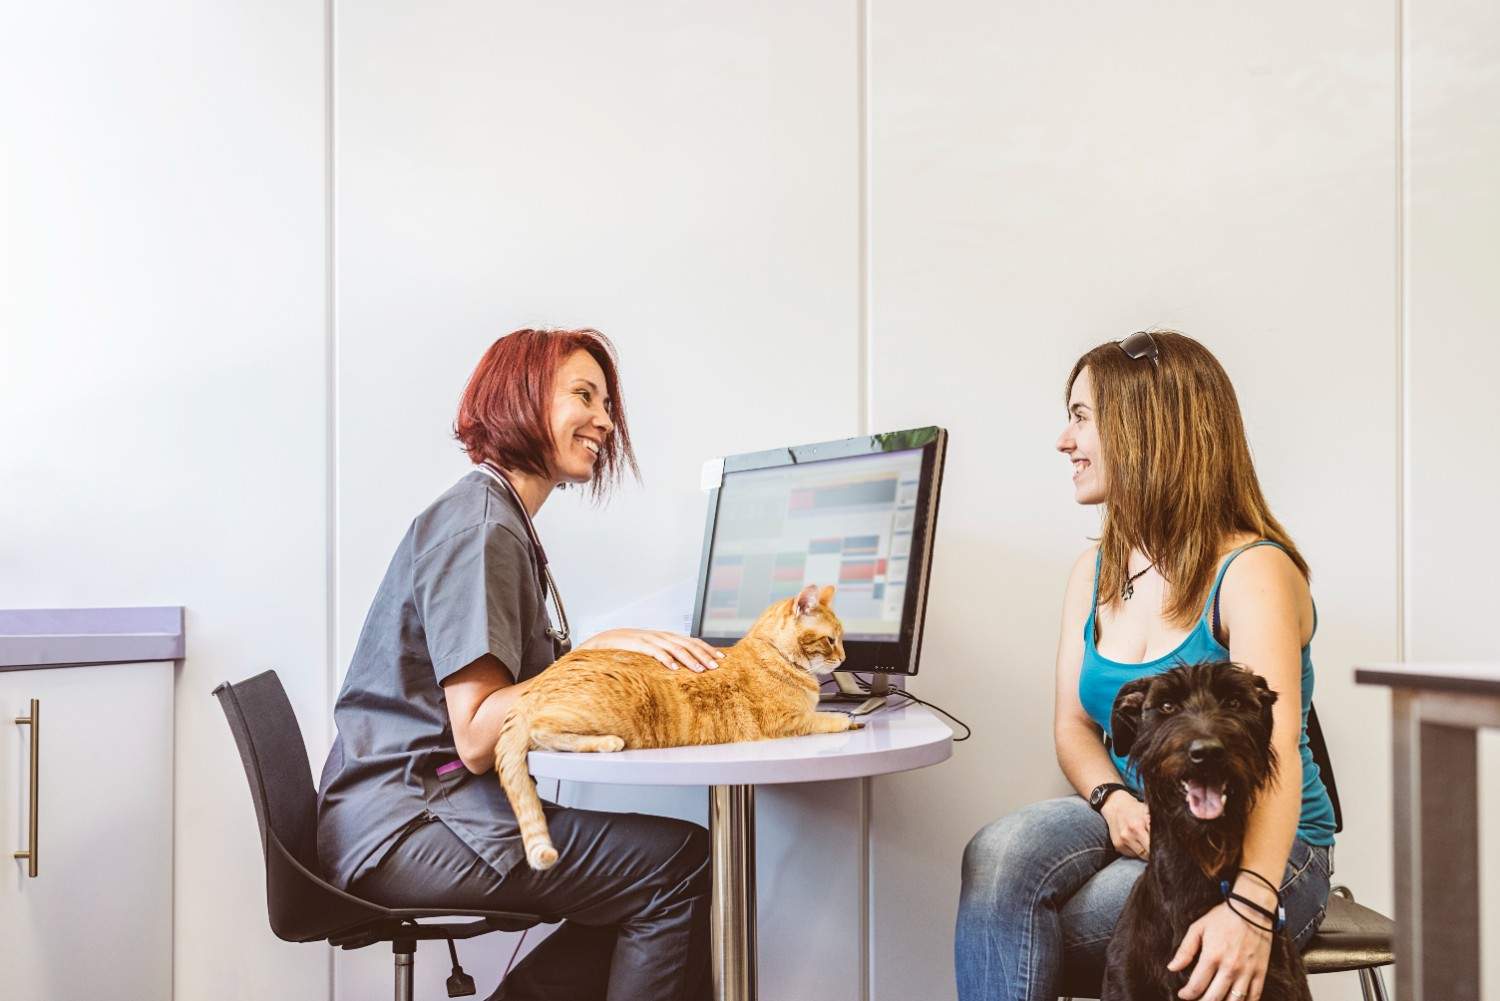 Does SEO Matter for Pet Grooming Businesses? Top SEO Tips to Excel Online